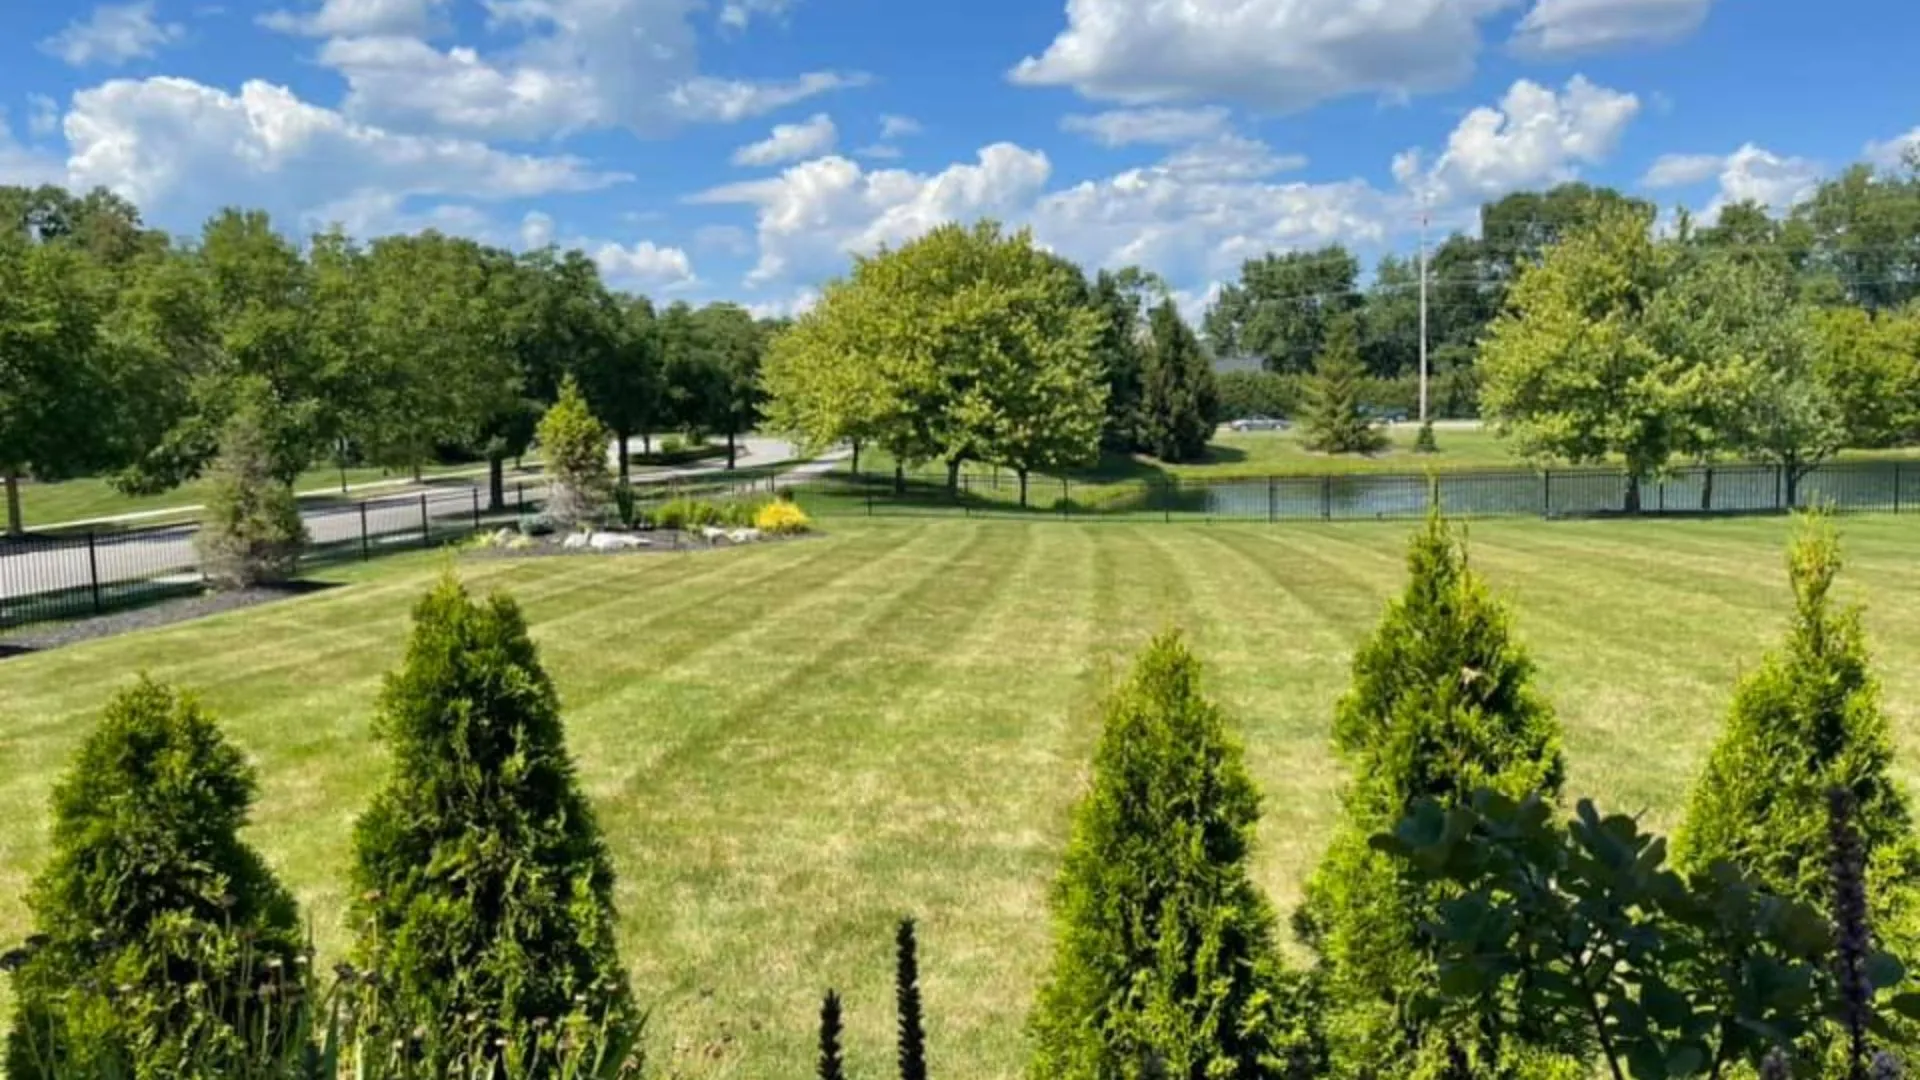 Lawn maintained and mowed by Precision Cutz in Avon, IN.